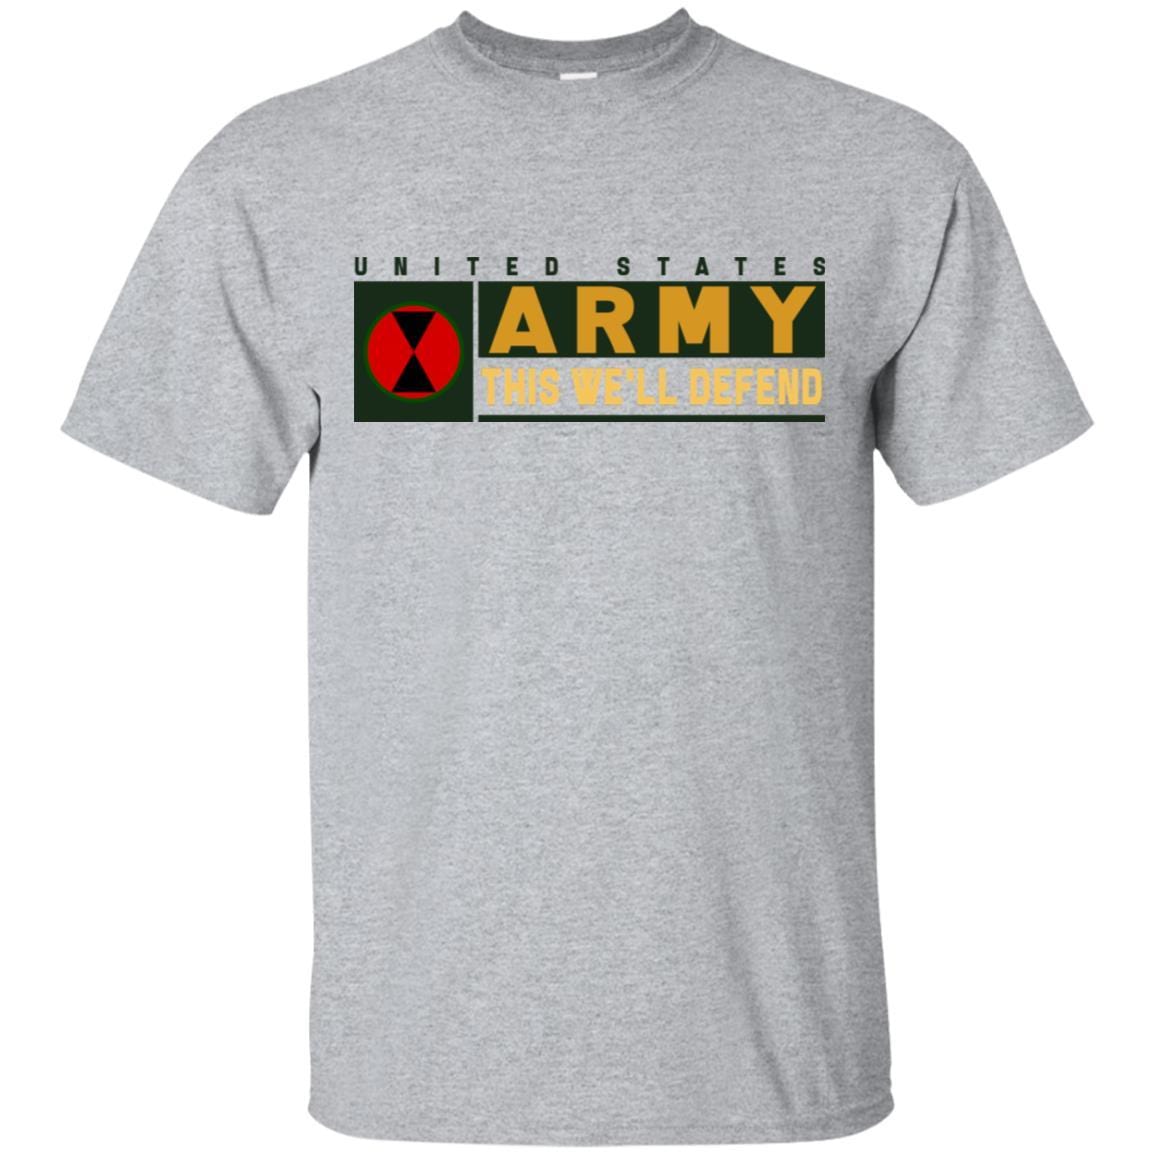 US Army 7th Infantry Division- This We'll Defend T-Shirt On Front For Men-TShirt-Army-Veterans Nation